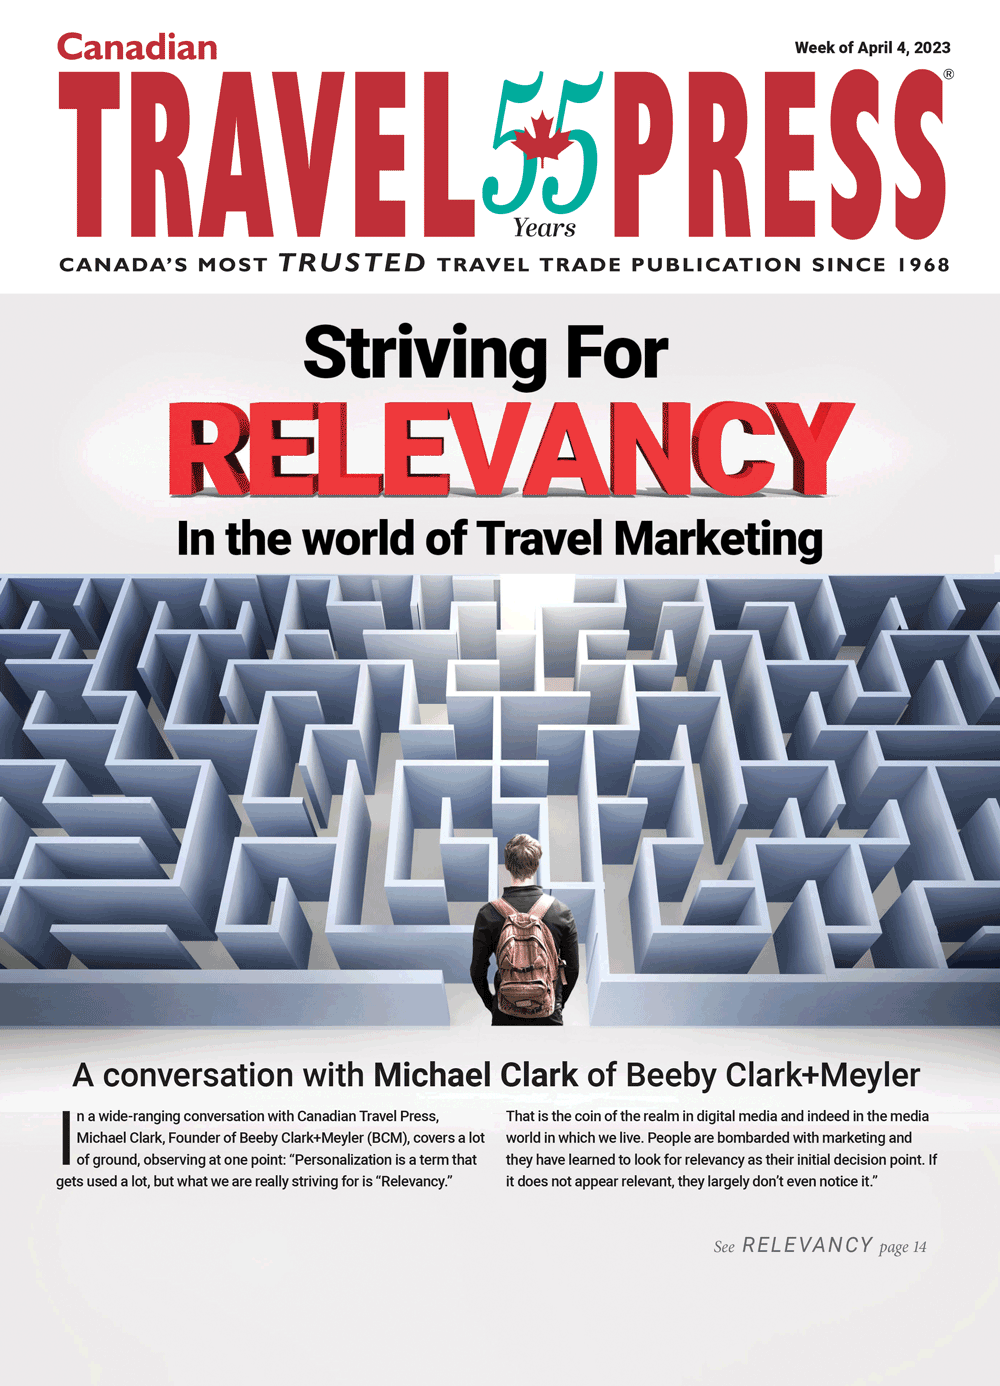 Searching for Relevancy in Travel Marketing